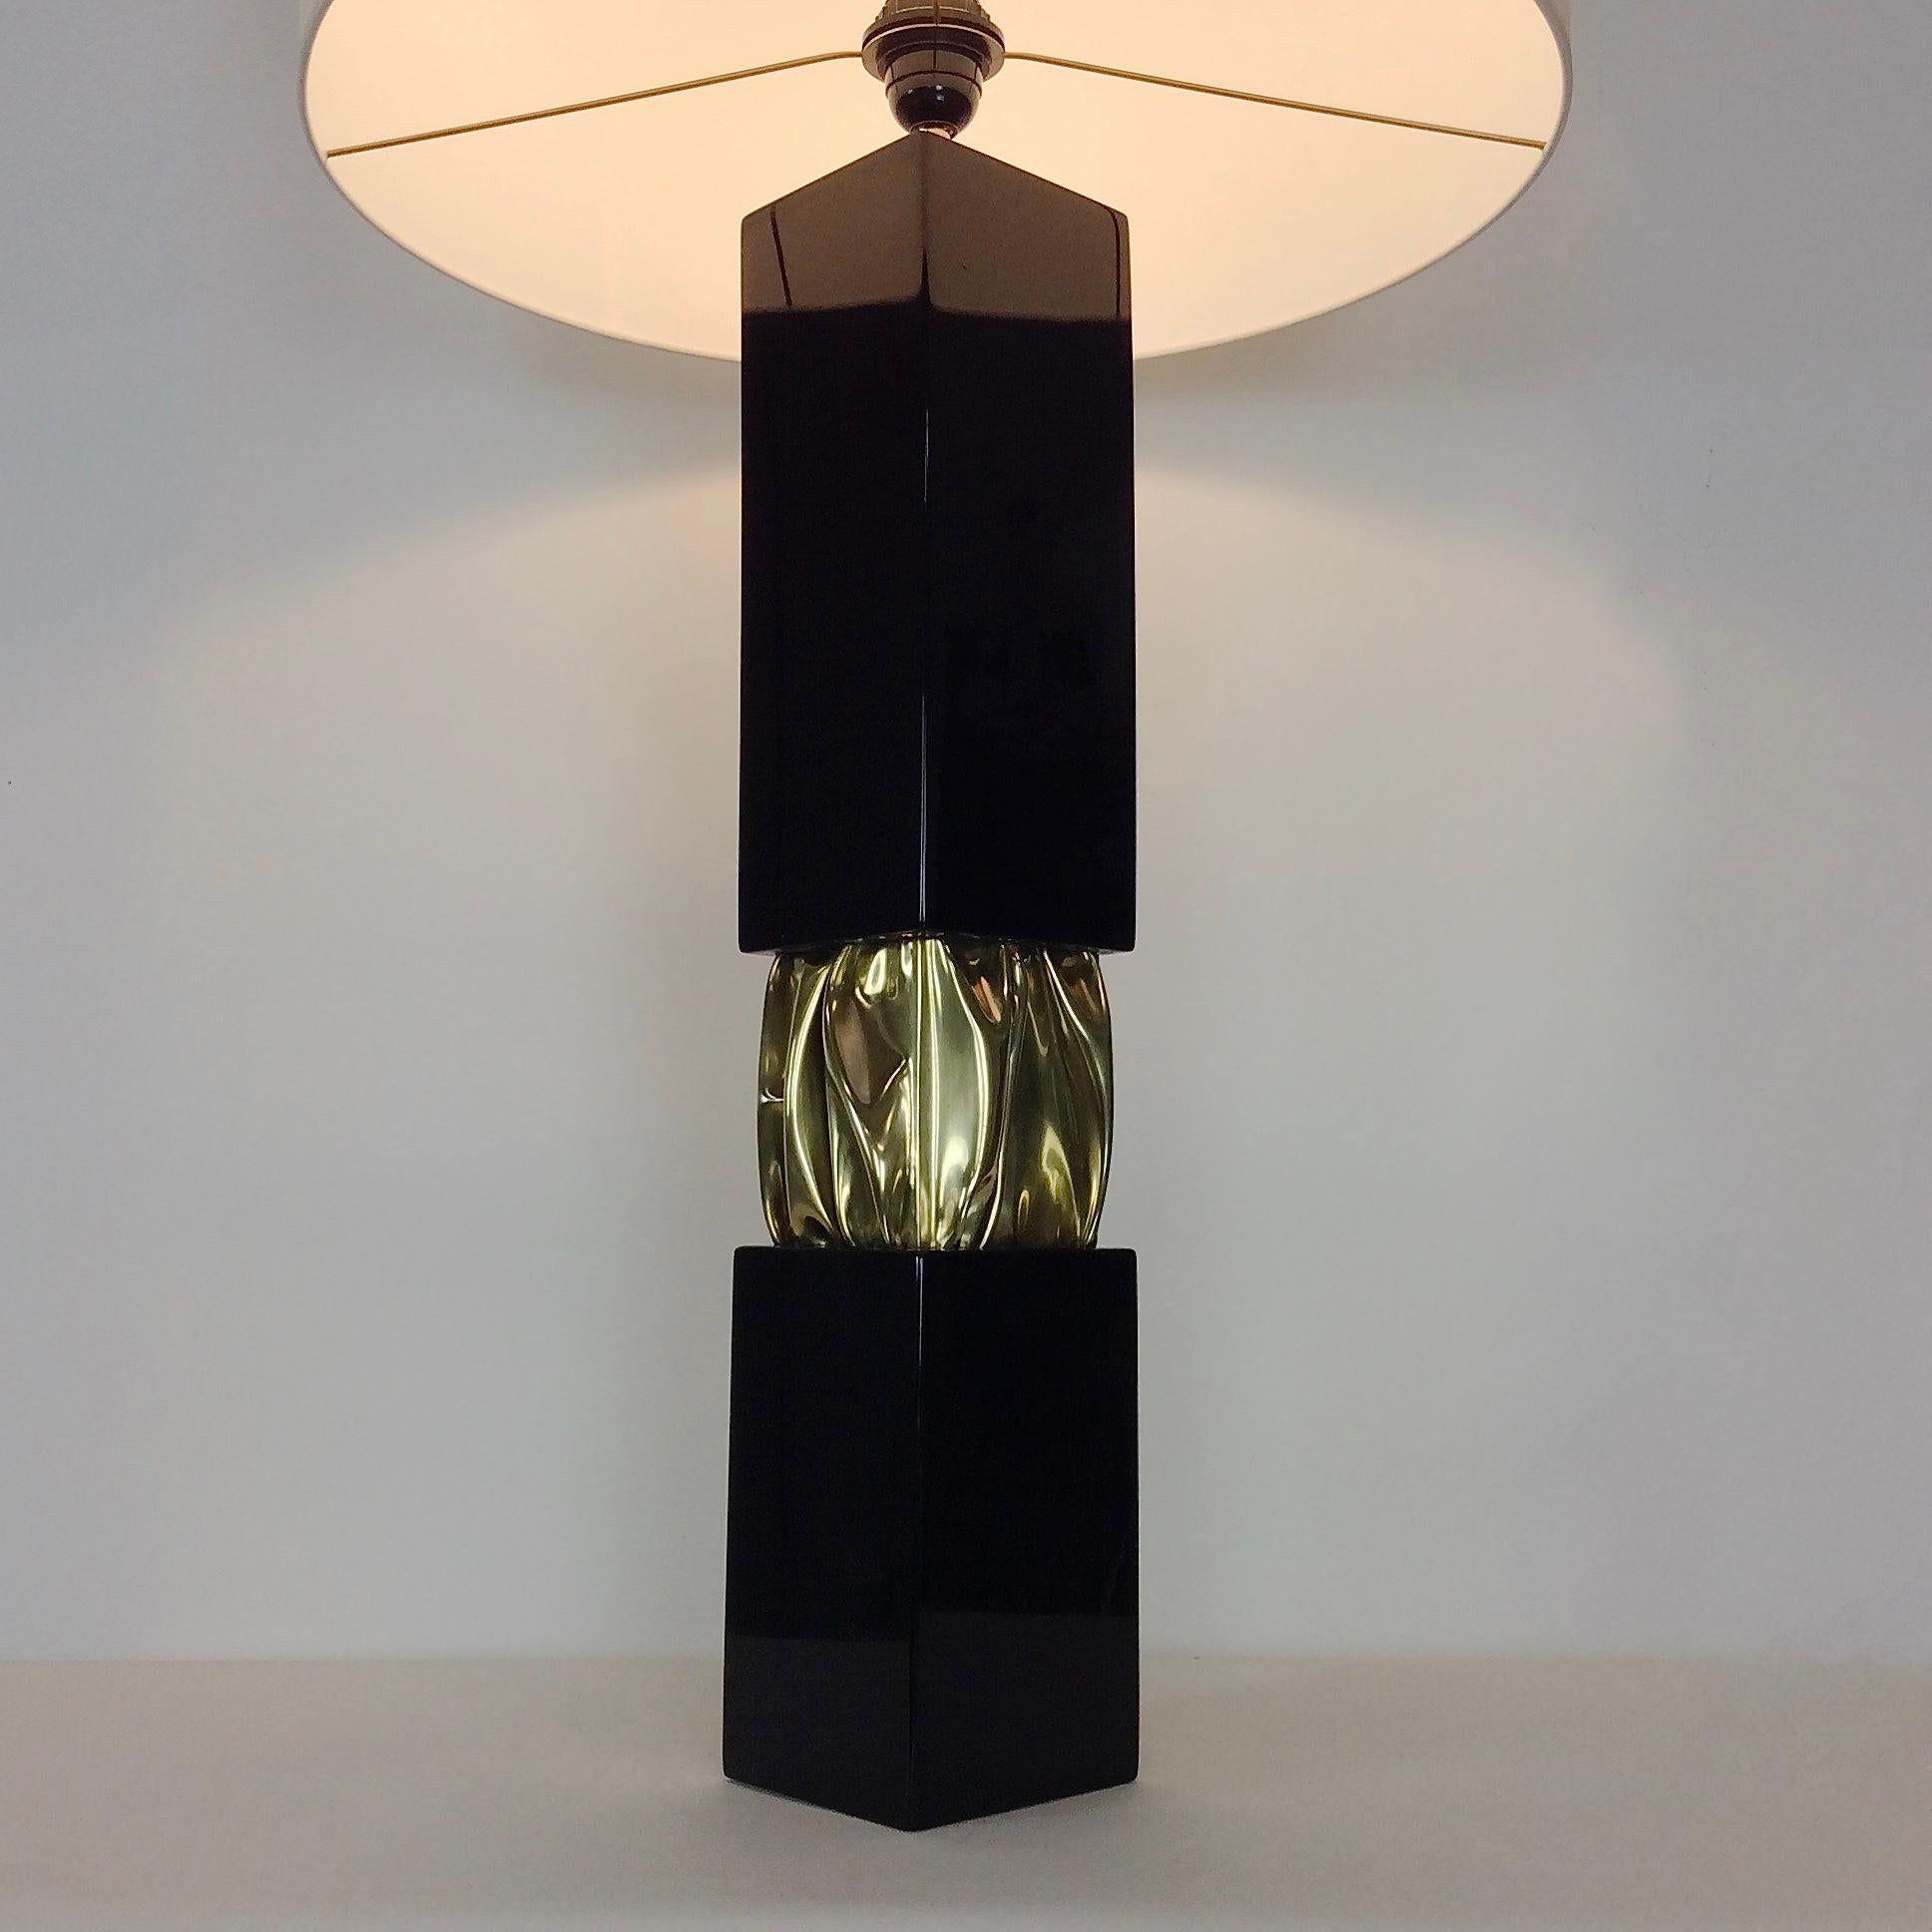 Jacques Moniquet Rare Table Lamp, Cheret Edition, circa 1975, France In Good Condition For Sale In Brussels, BE